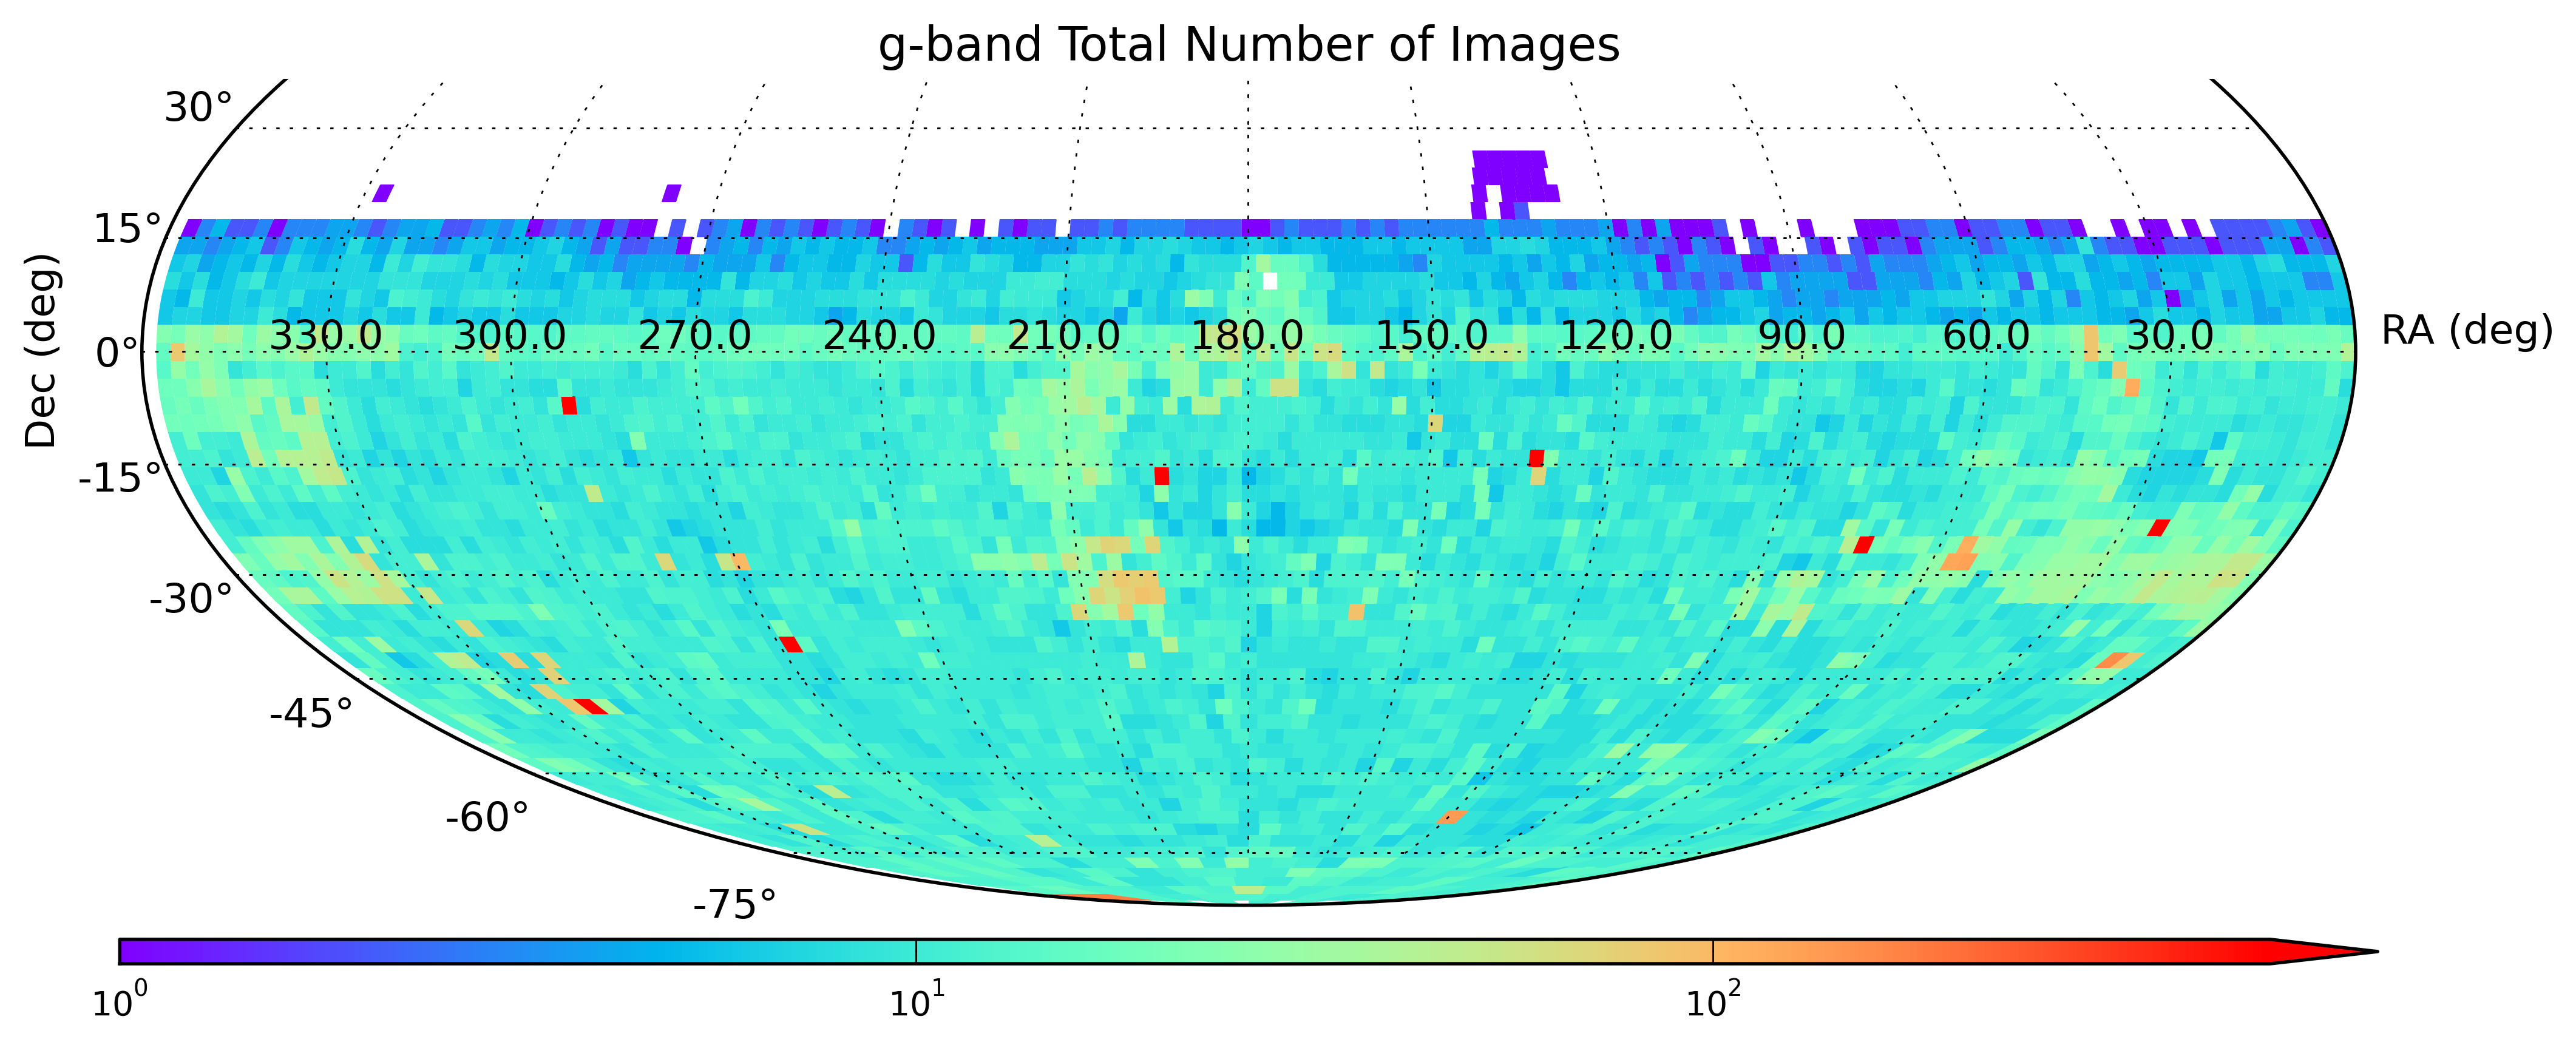 g-band coverage